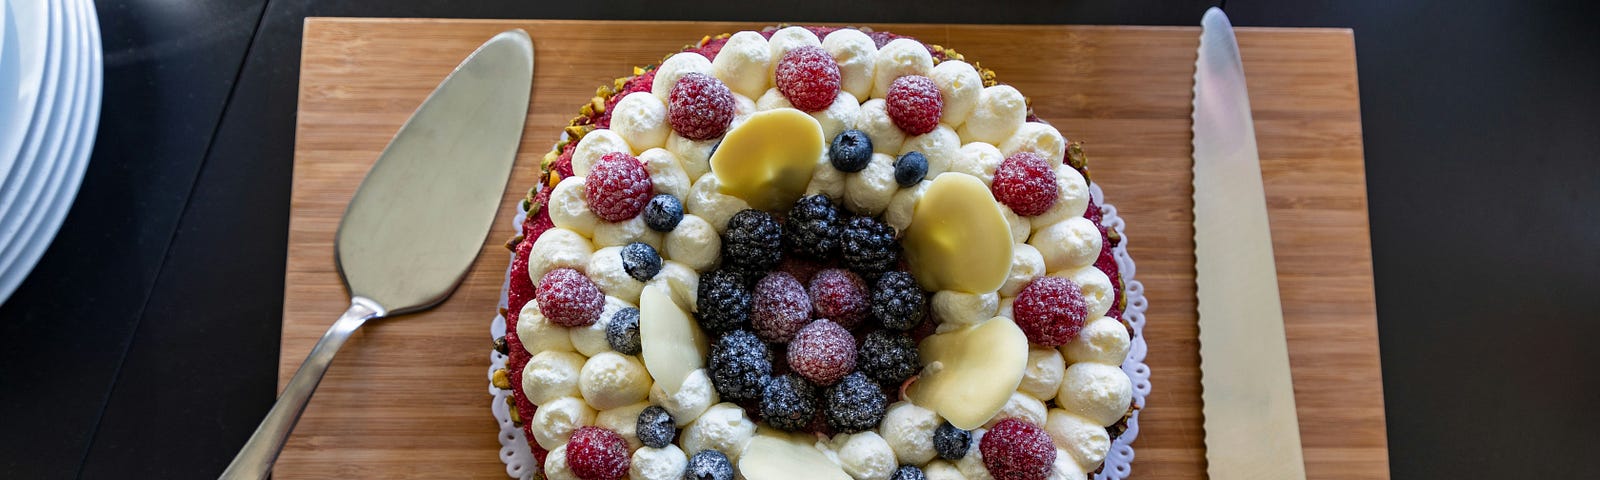 multi berry dessert on display waiting to be cut and served